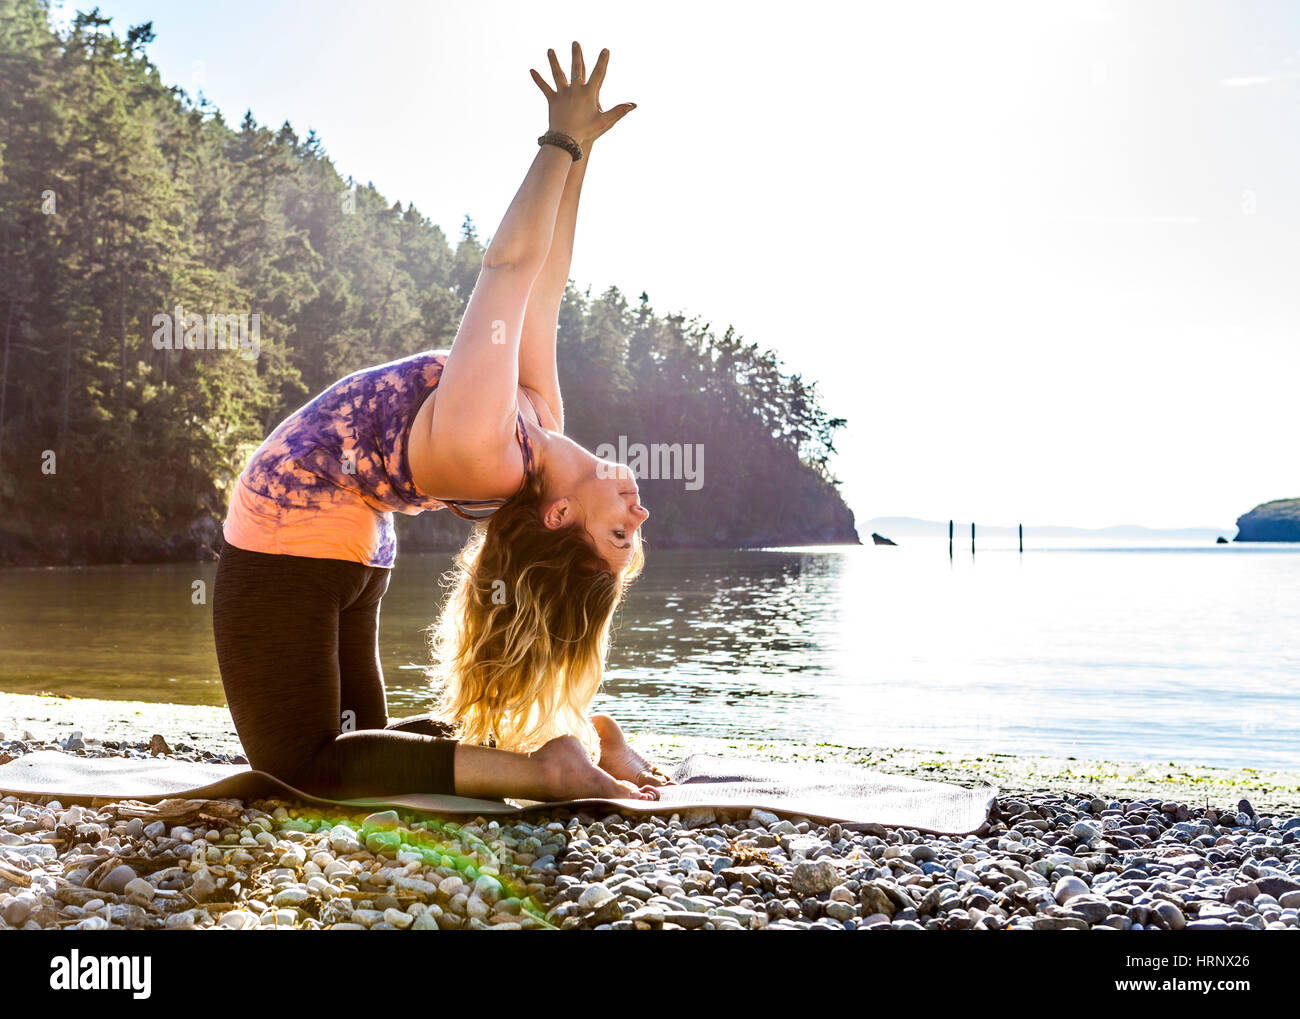 A woman practicing yoga in a beautiful outdoor setting. Stock Photo